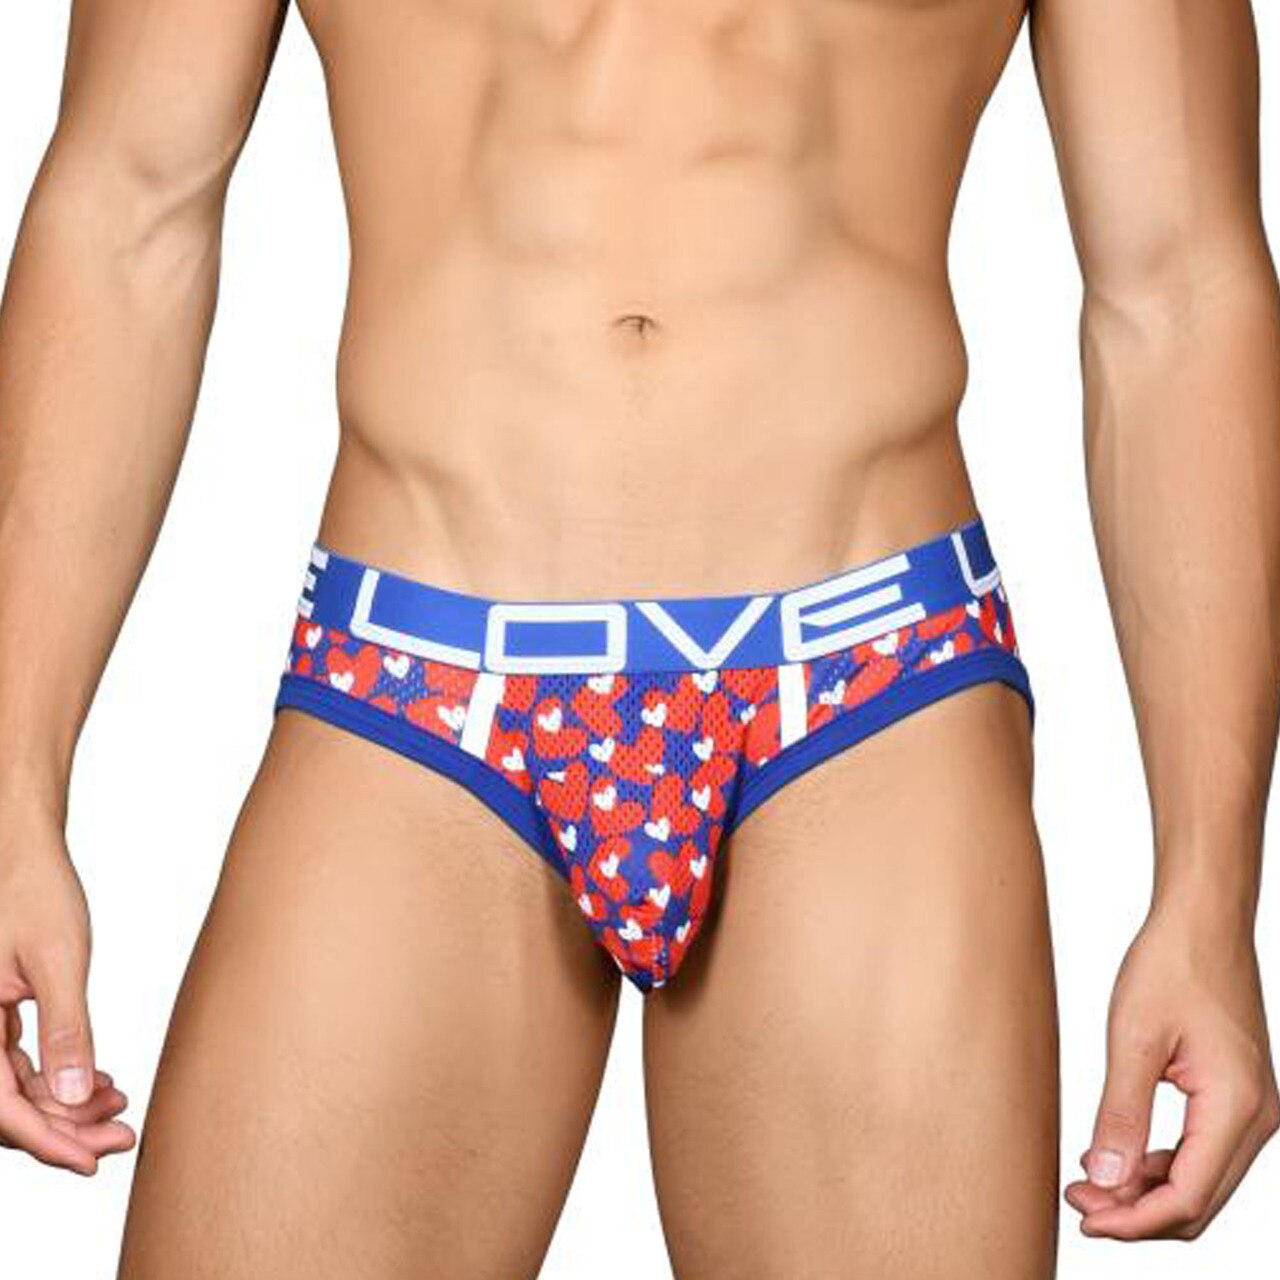 SALE - Mens Andrew Christian Love Sweetheart Mesh Brief w/ Almost Naked